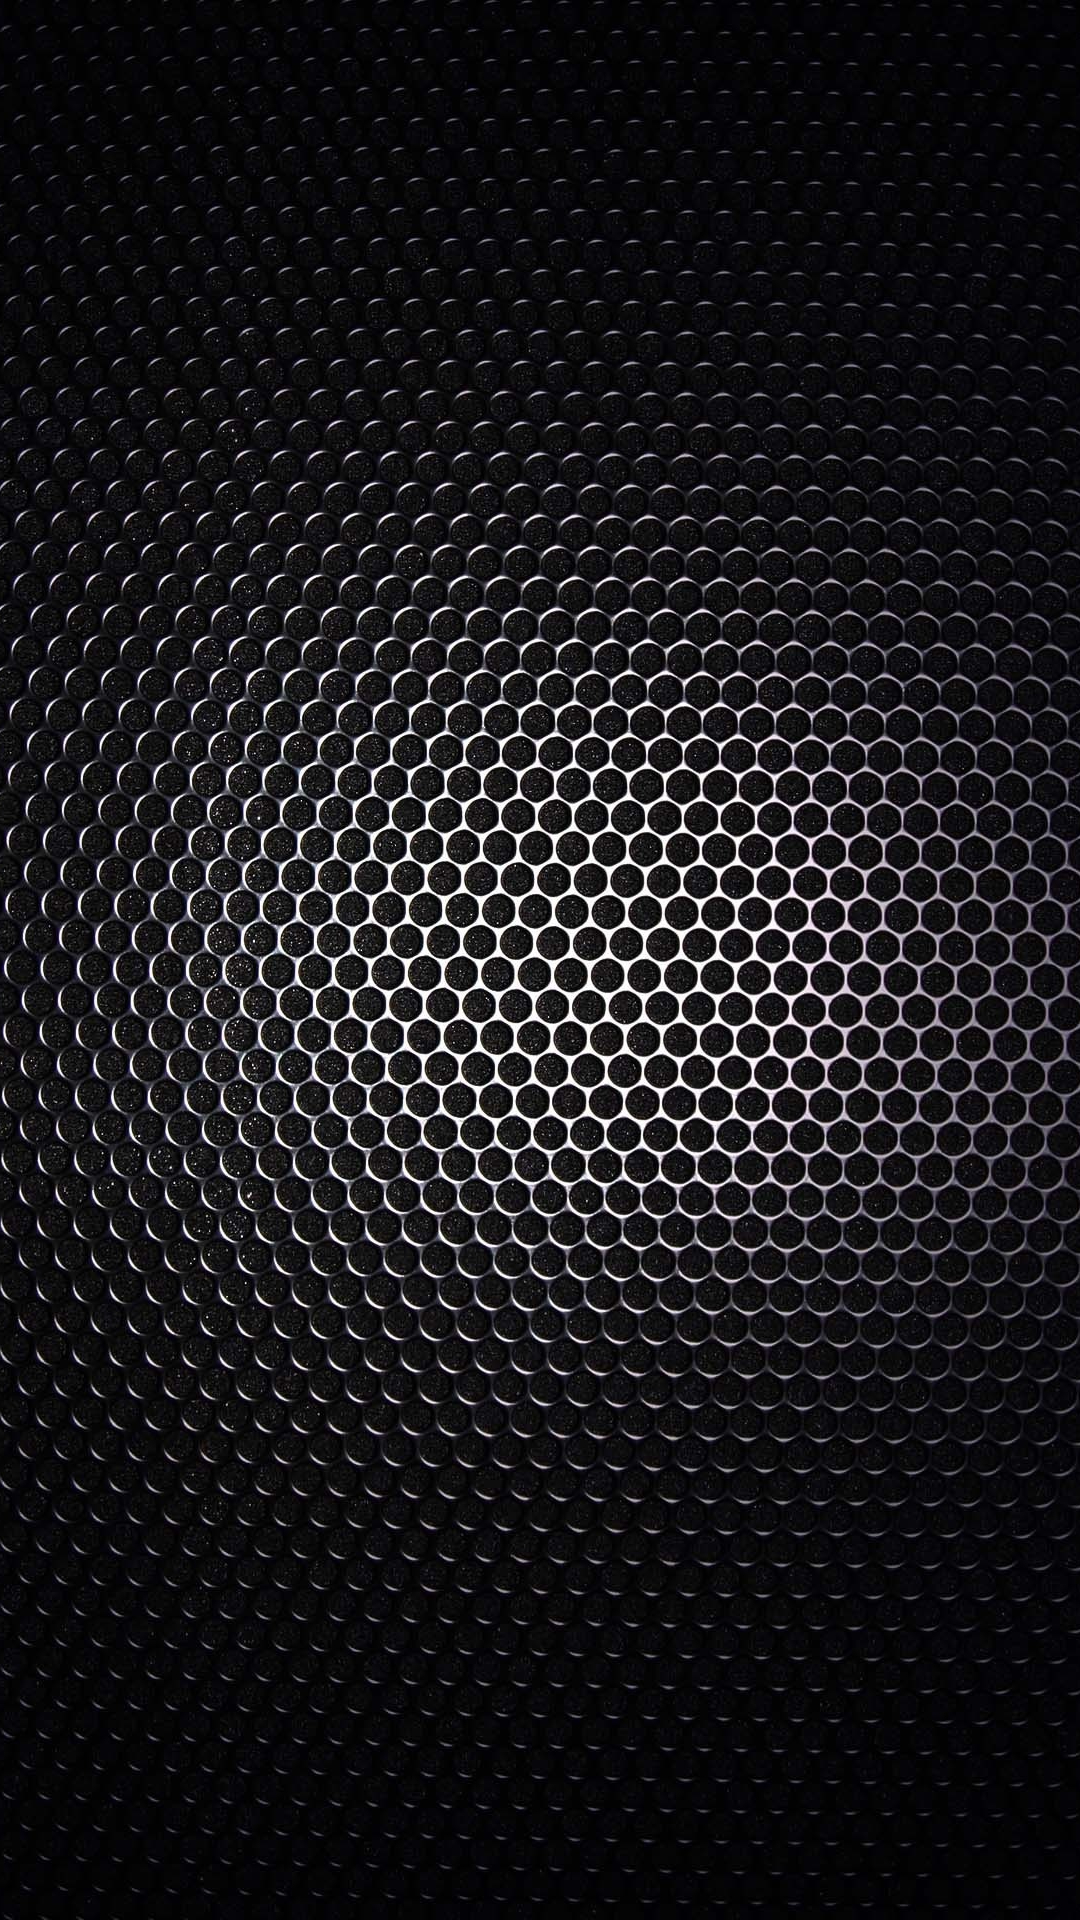 S4 Wallpaper With Black Metal Grid Design In Resolution